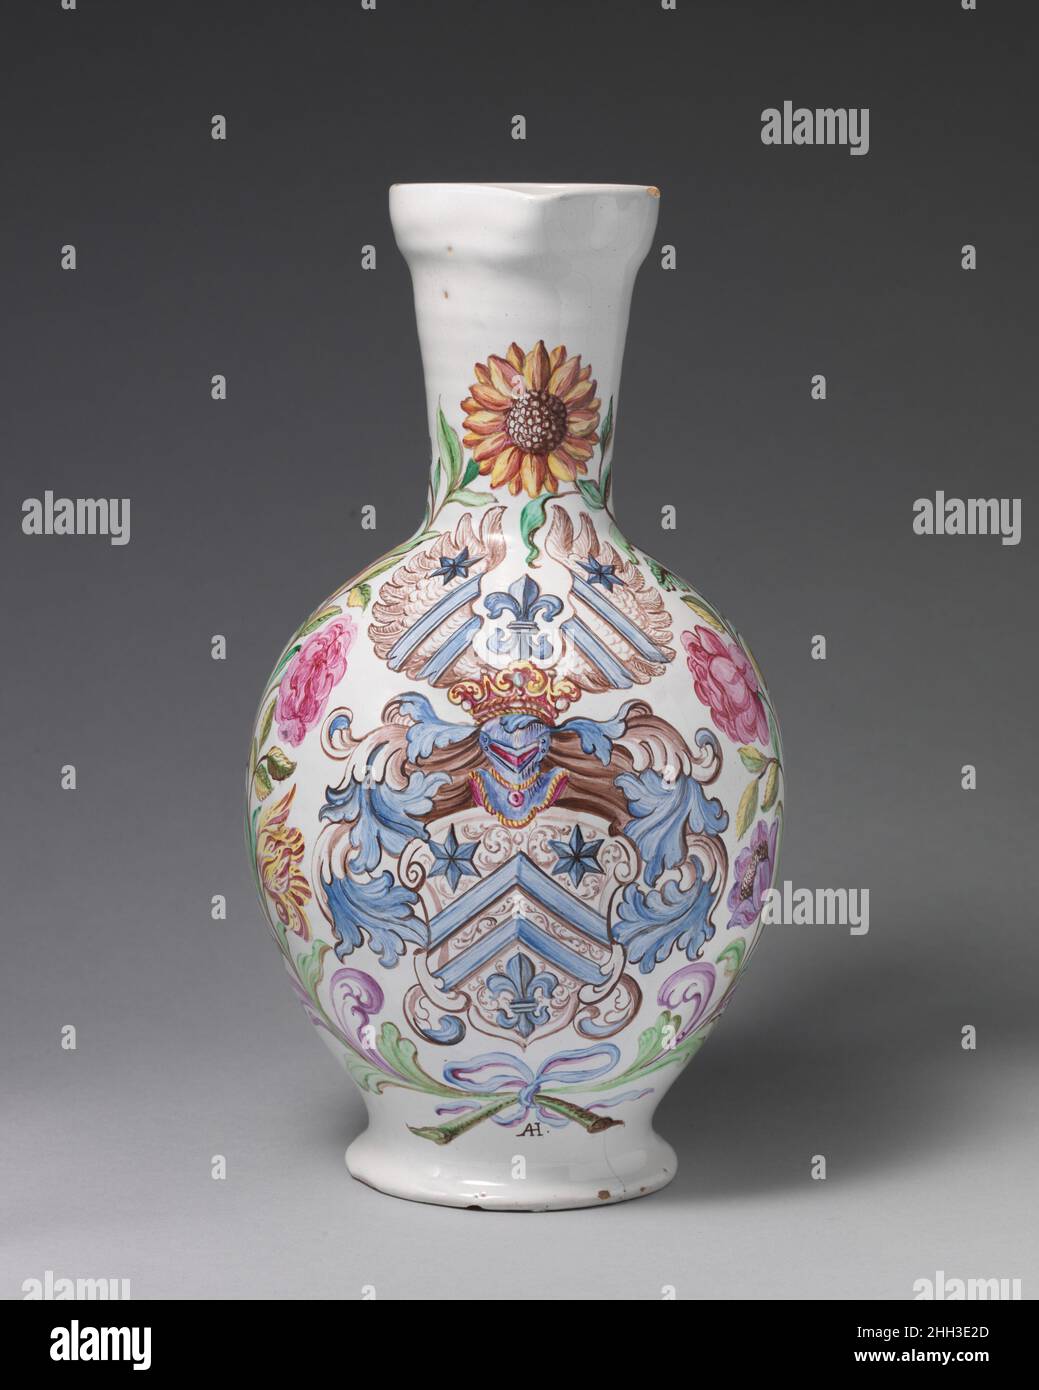 Jug with coat-of-arms of the Cleminius Family ca. 1700 Abraham Helmhack The end of the Thirty Years War in 1648 saw the revival of domestic industries such as decorated faience wares, which catered to the German bourgeoisie. Abraham Helmhack (1654–1724) was a Hausmaler, or independent decorator, who specialized in biblical motifs, flowers, and coats-of-arms. This example, painted for the Cleminius family, features a coat-of-arms set within a lavish floral border. His monogram AH can be found at the foot of the vessel.. Jug with coat-of-arms of the Cleminius Family. German, Frankfurt with Nurem Stock Photo